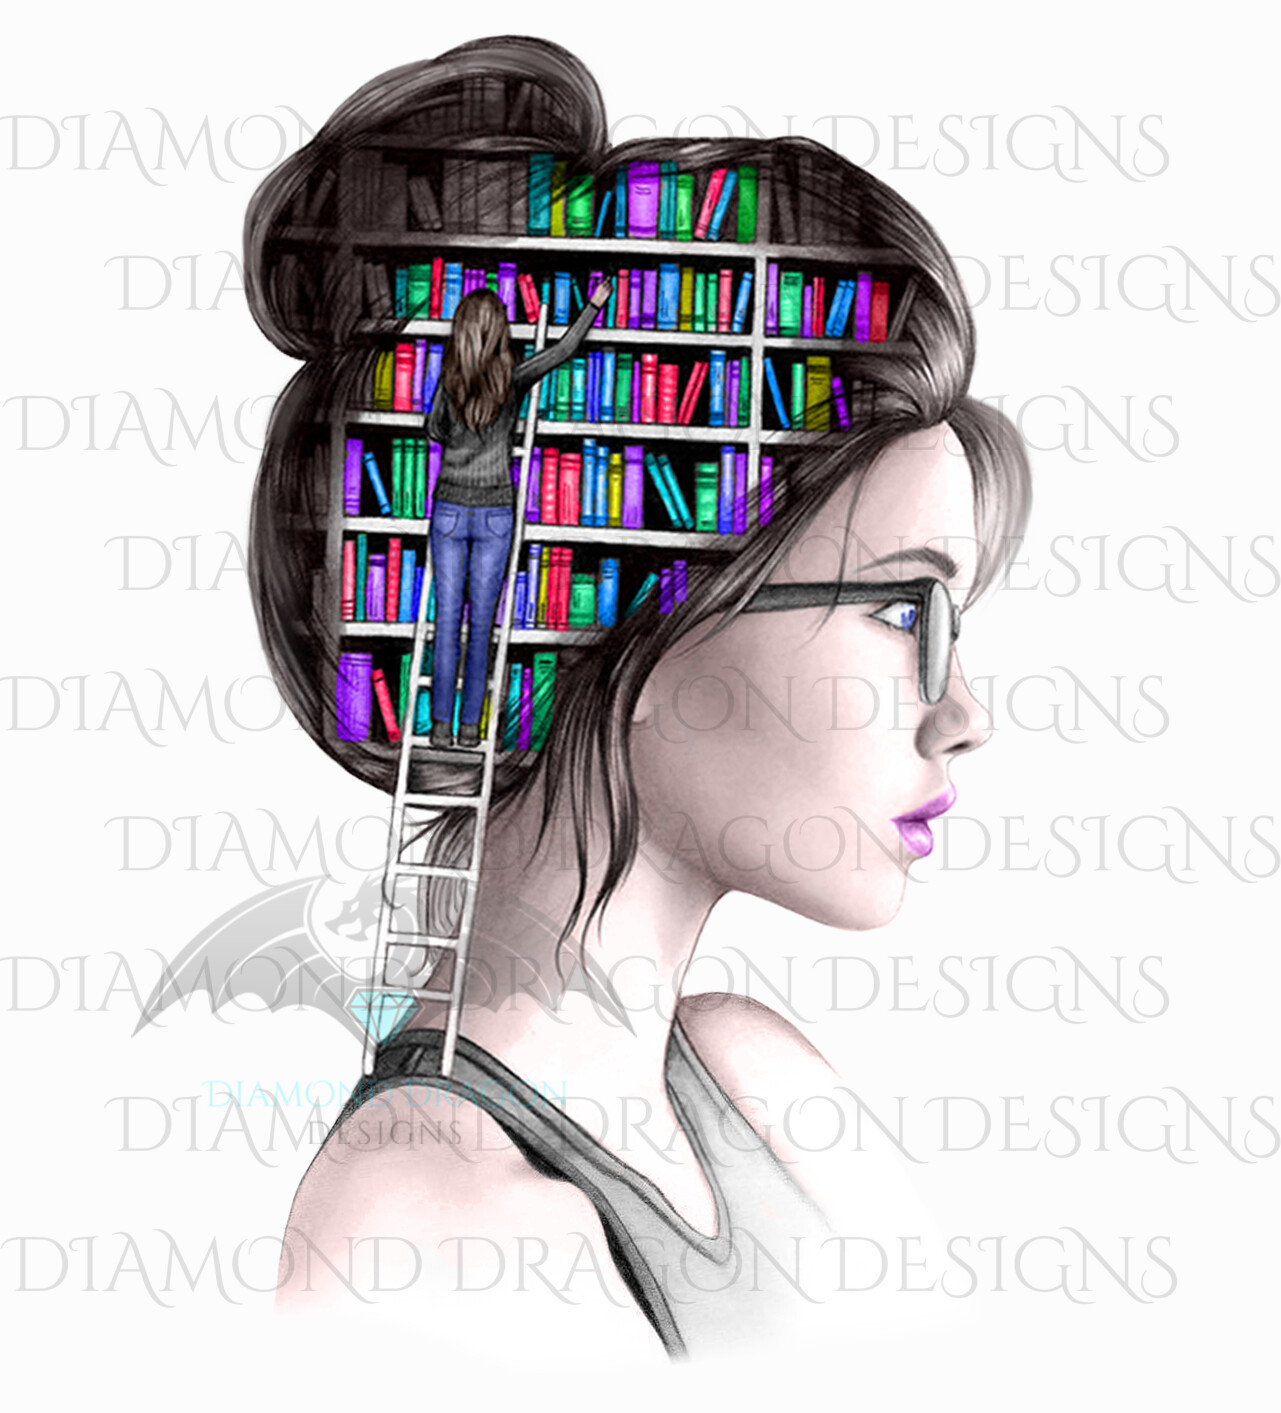 Books - Lady Library, Book Girl, Book Lover, Woman with Books, Bookshelf, Vibrant, Waterslide